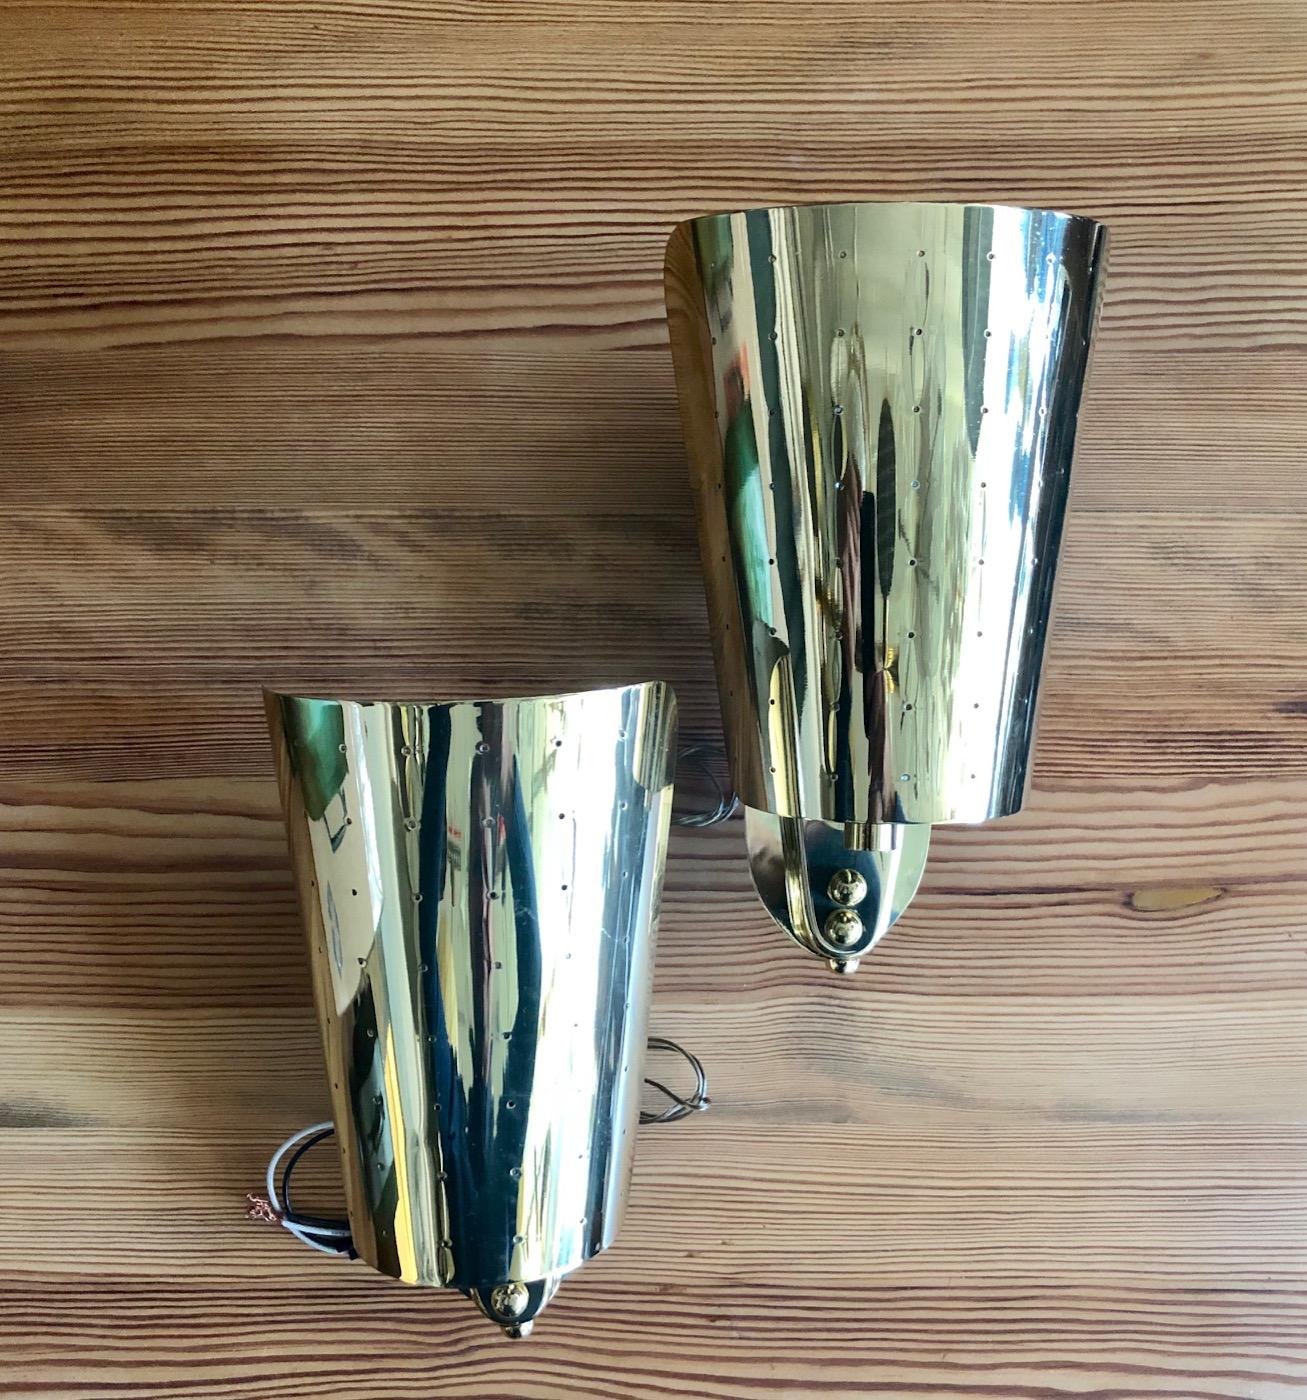 Midcentury pair of wall lights in style of Paavo Tynell, Finland, circa 1950s.
Perforated polished brass, newly rewired.